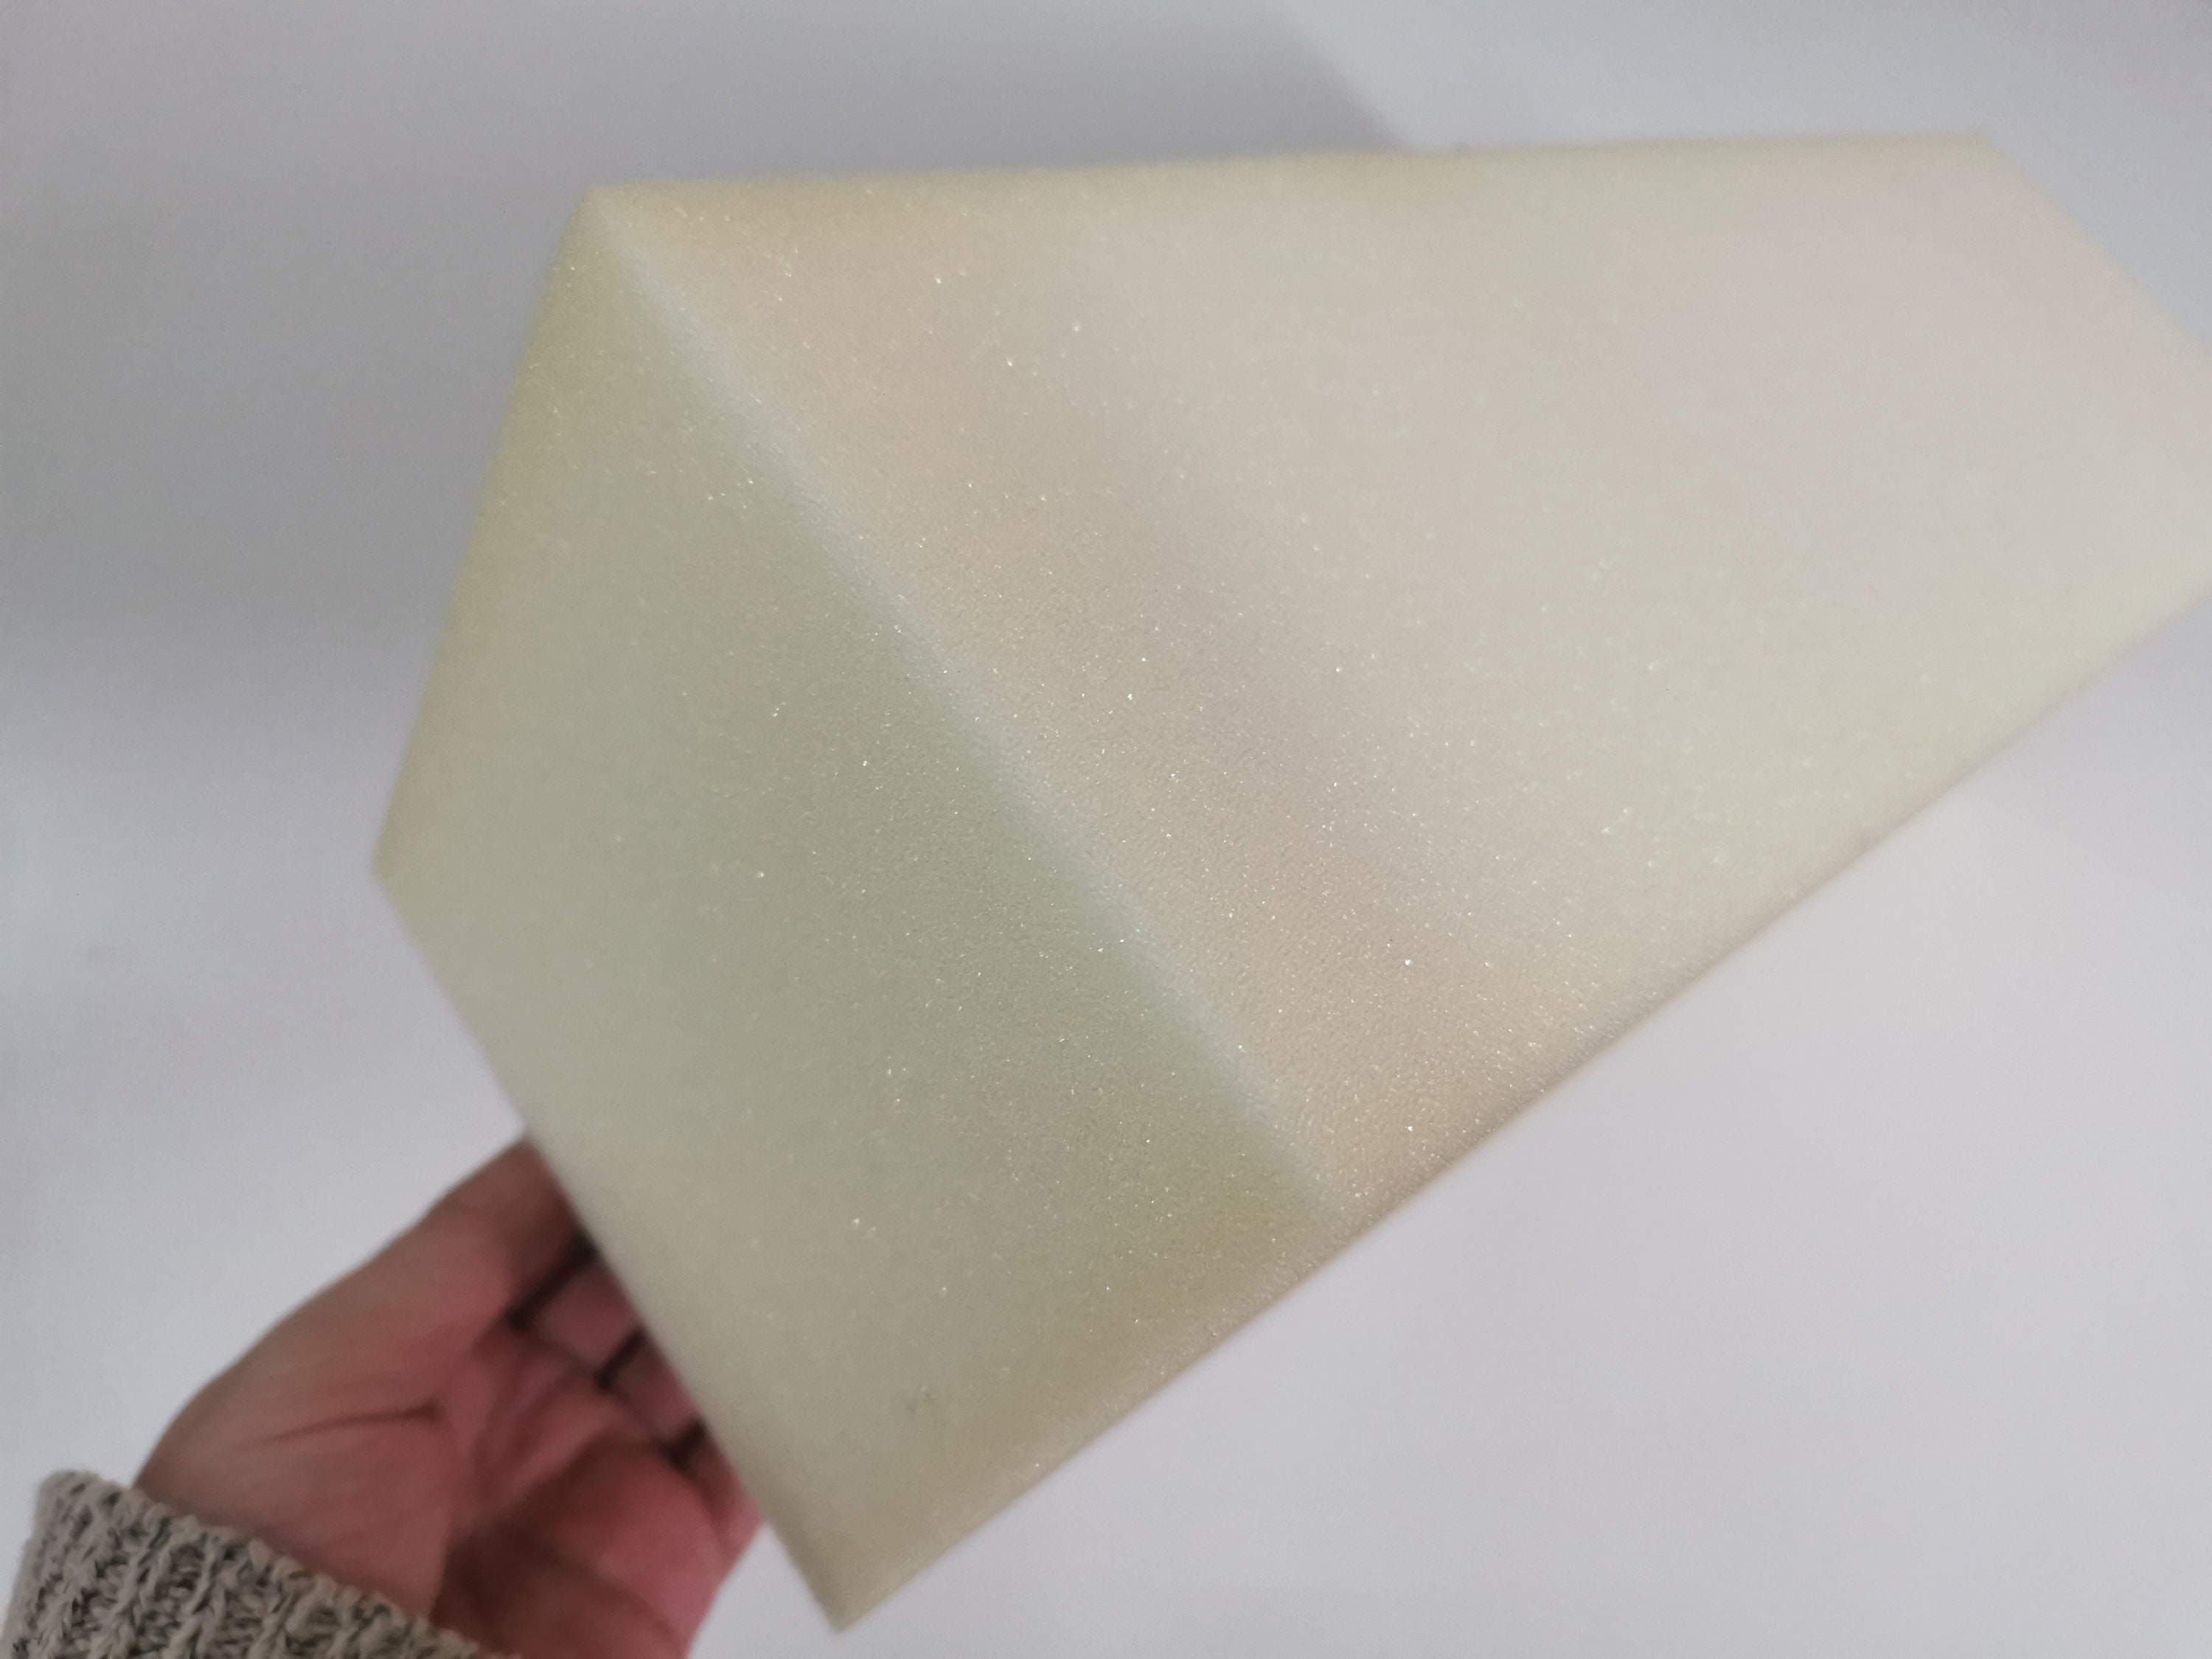 6 thick - High Density Upholstery Foam - Custom Sizes and Shapes